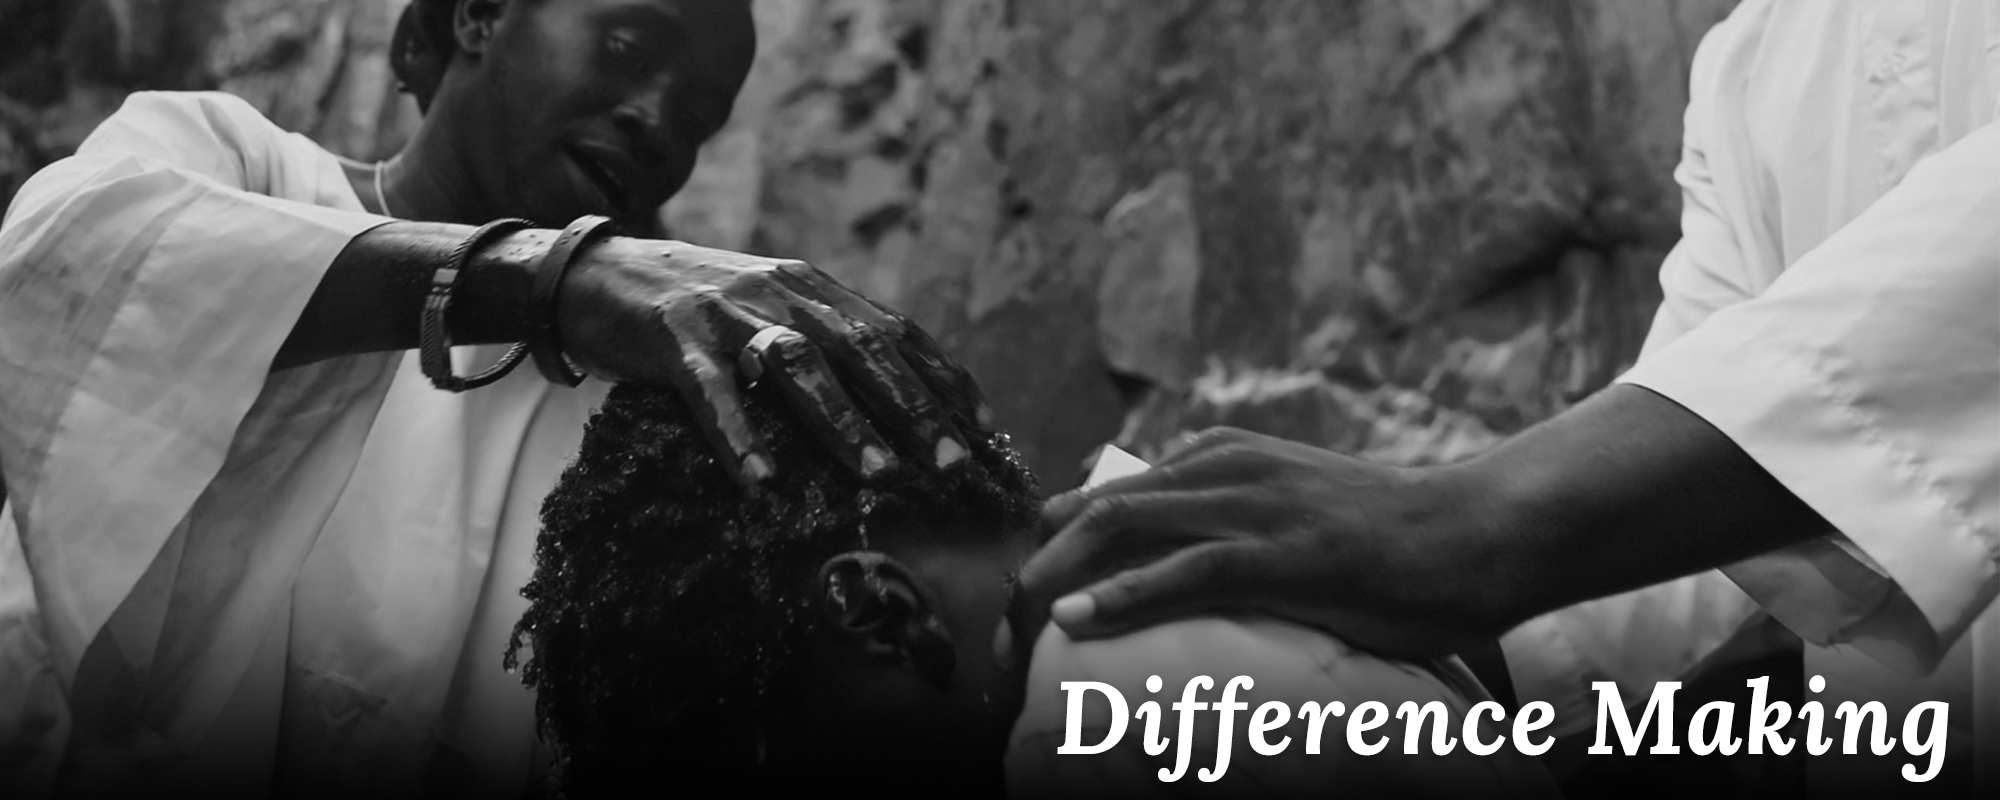 Difference Making - For Faith Devotional by Robert Wright - Person Baptizing